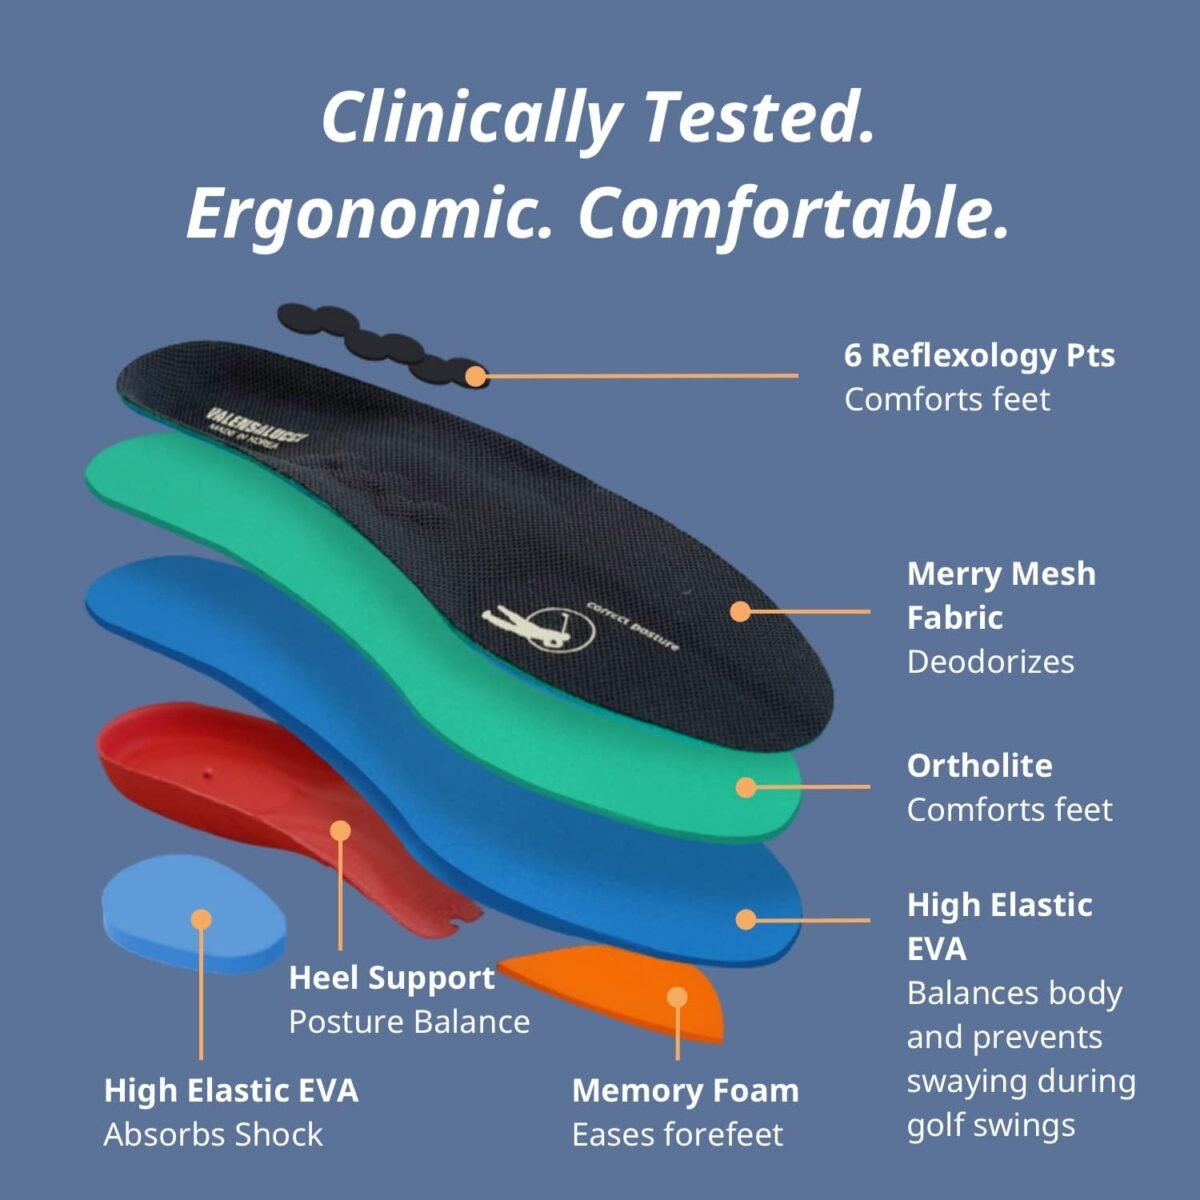 Comparing and Reviewing 5 High-Performance Insoles